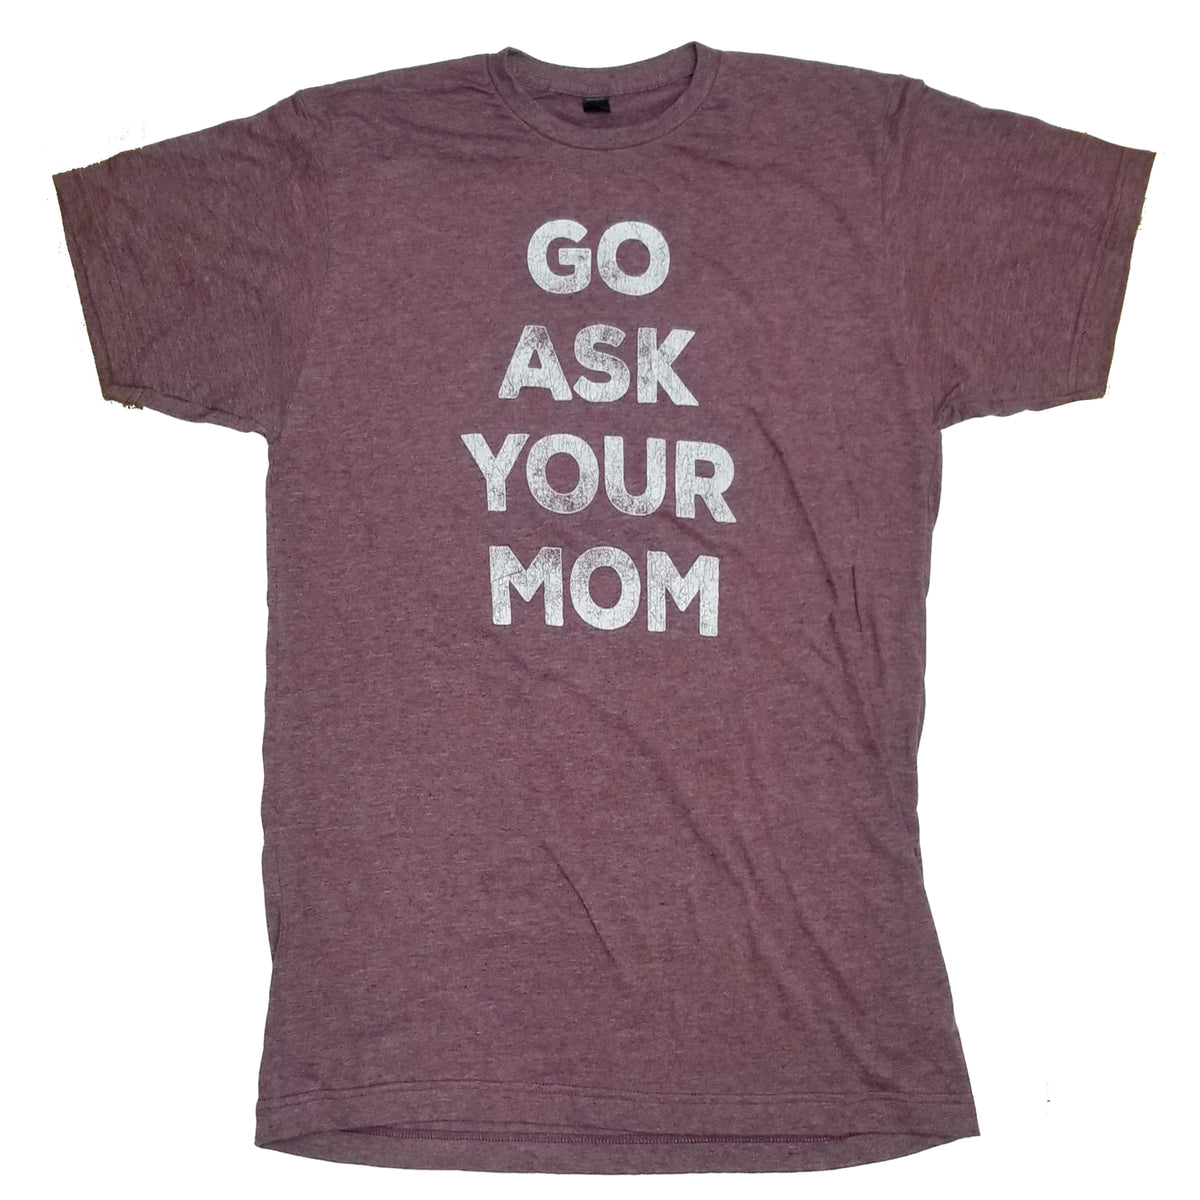 Go Ask your mom Tee